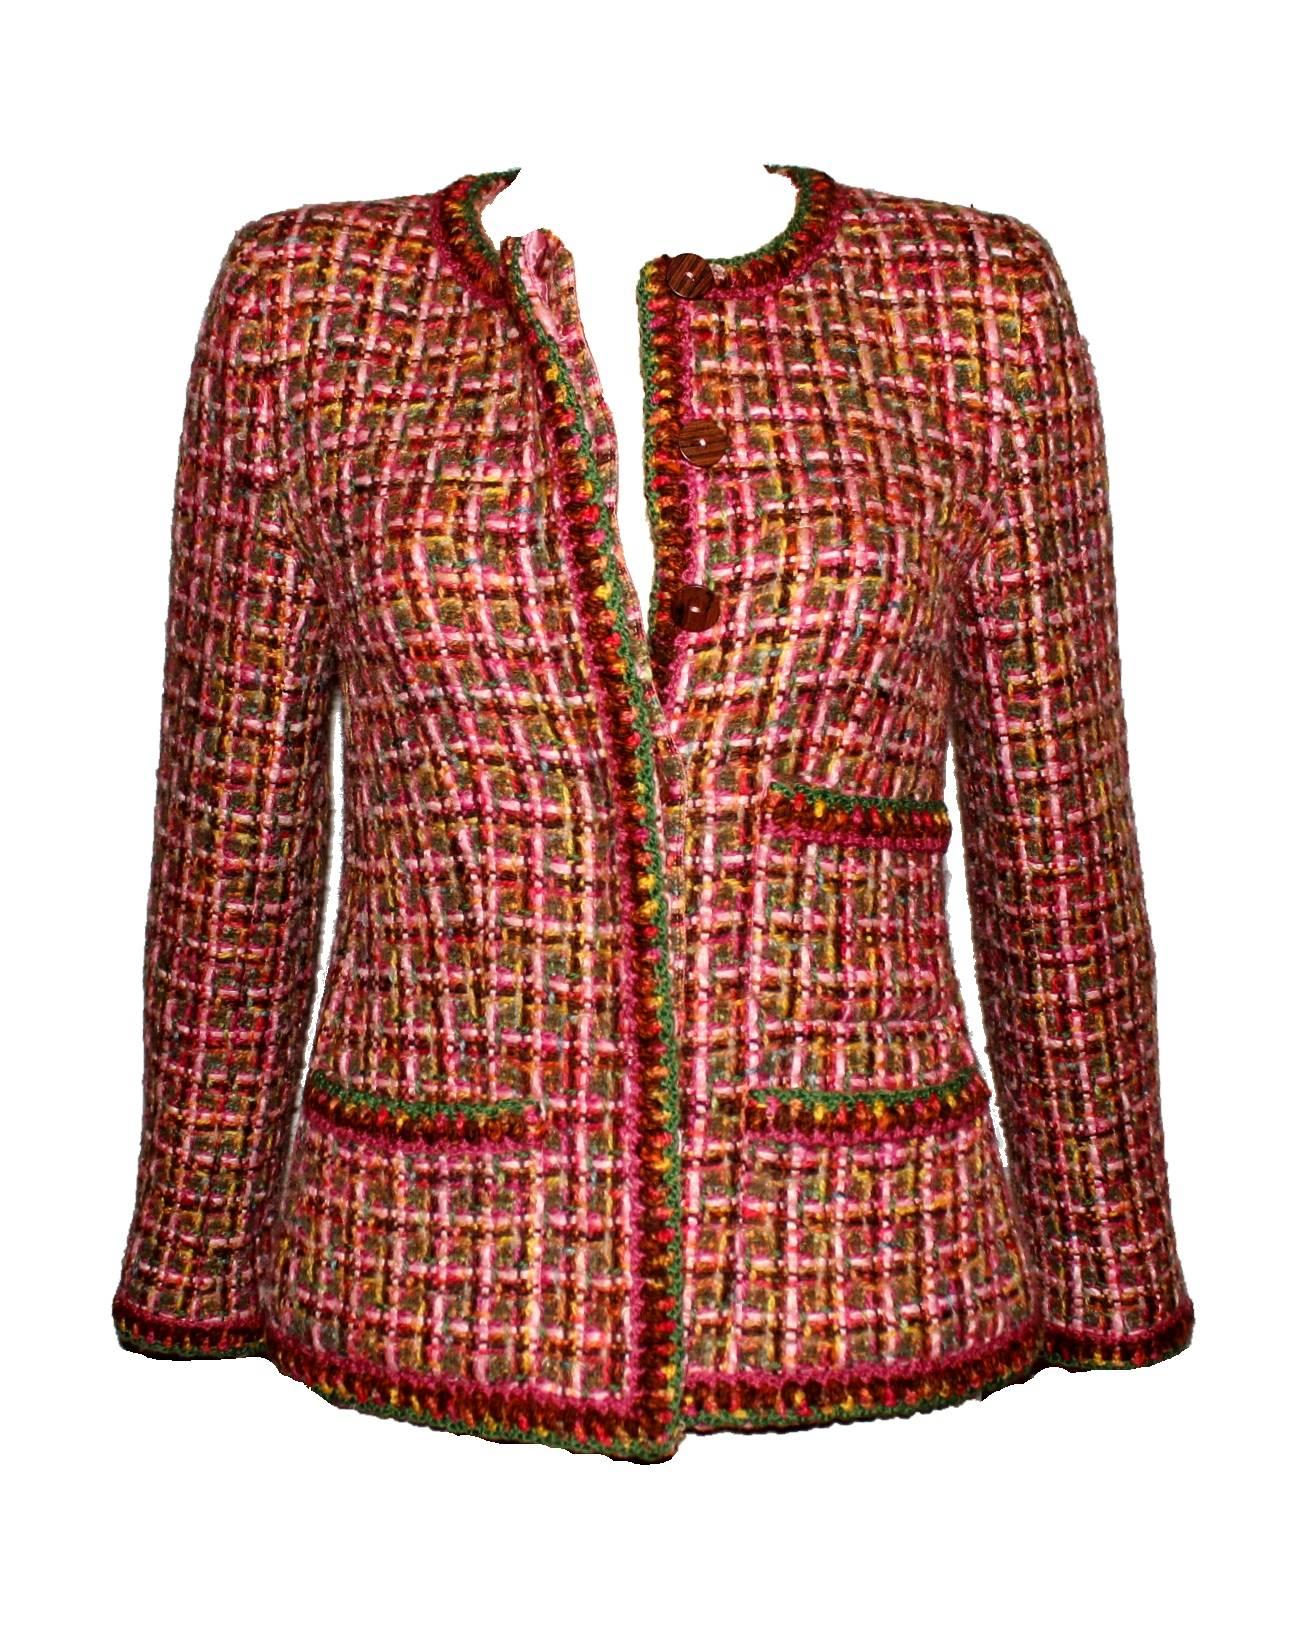 
BEAUTIFUL CHANEL TWEED JACKET

DESIGNED BY KARL LAGERFELD

A TRUE CHANEL PIECE THAT SHOULD BE IN EVERY WOMAN'S WARDROBE

SO GORGEOUS

DETAILS:

        Perfect to be worn casual with jeans or dressed up - an iconic CHANEL jacket
       